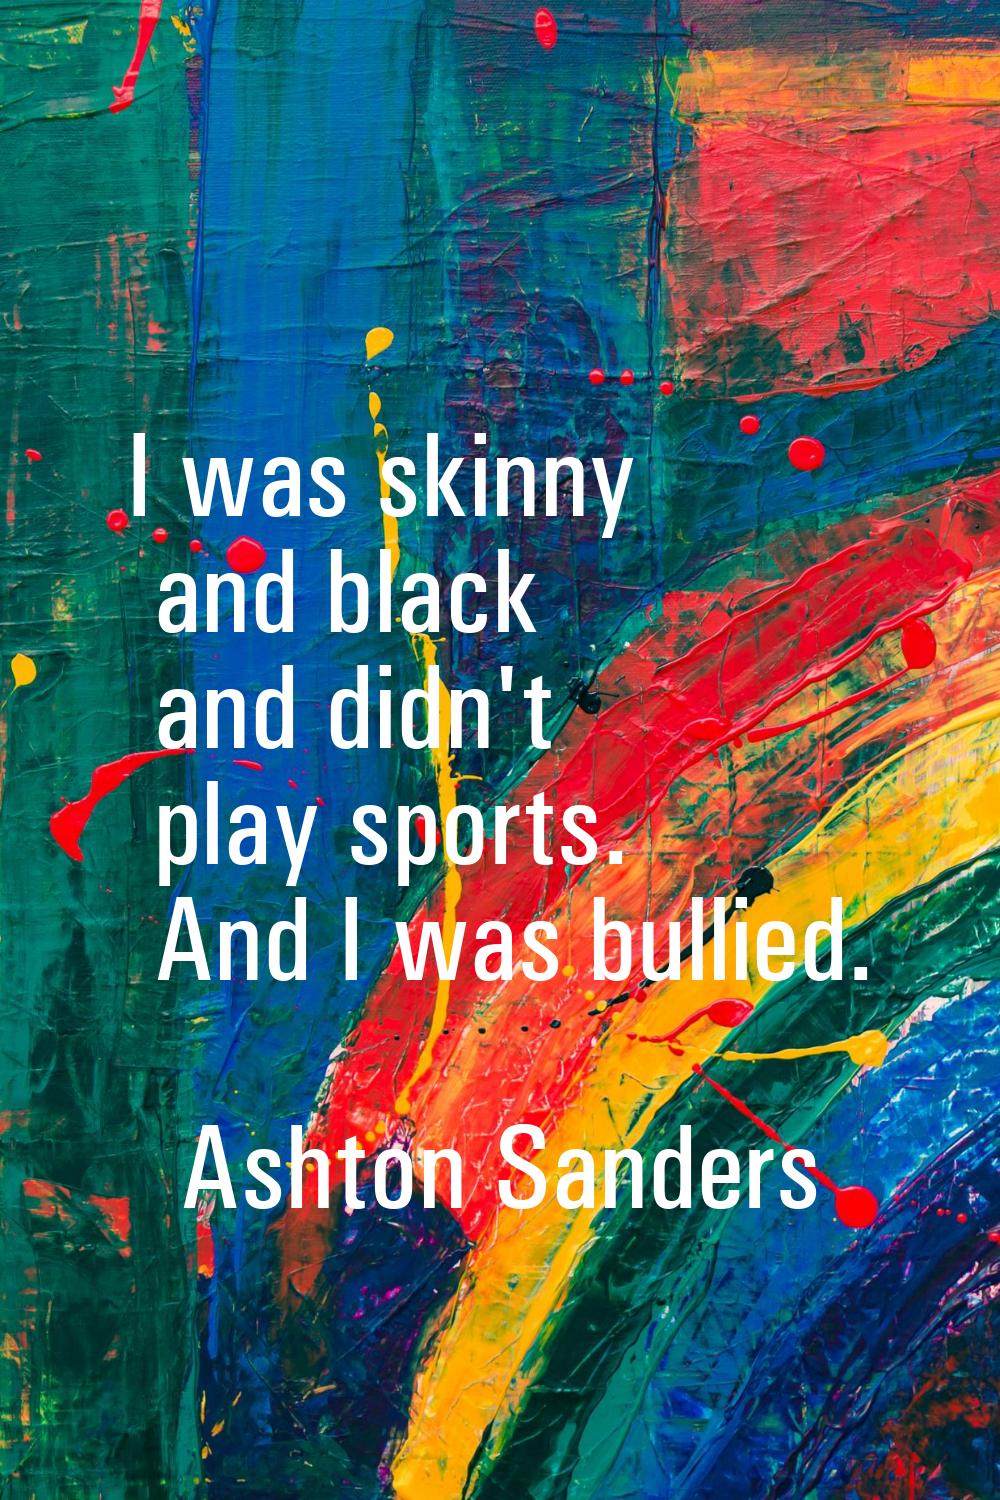 I was skinny and black and didn't play sports. And I was bullied.